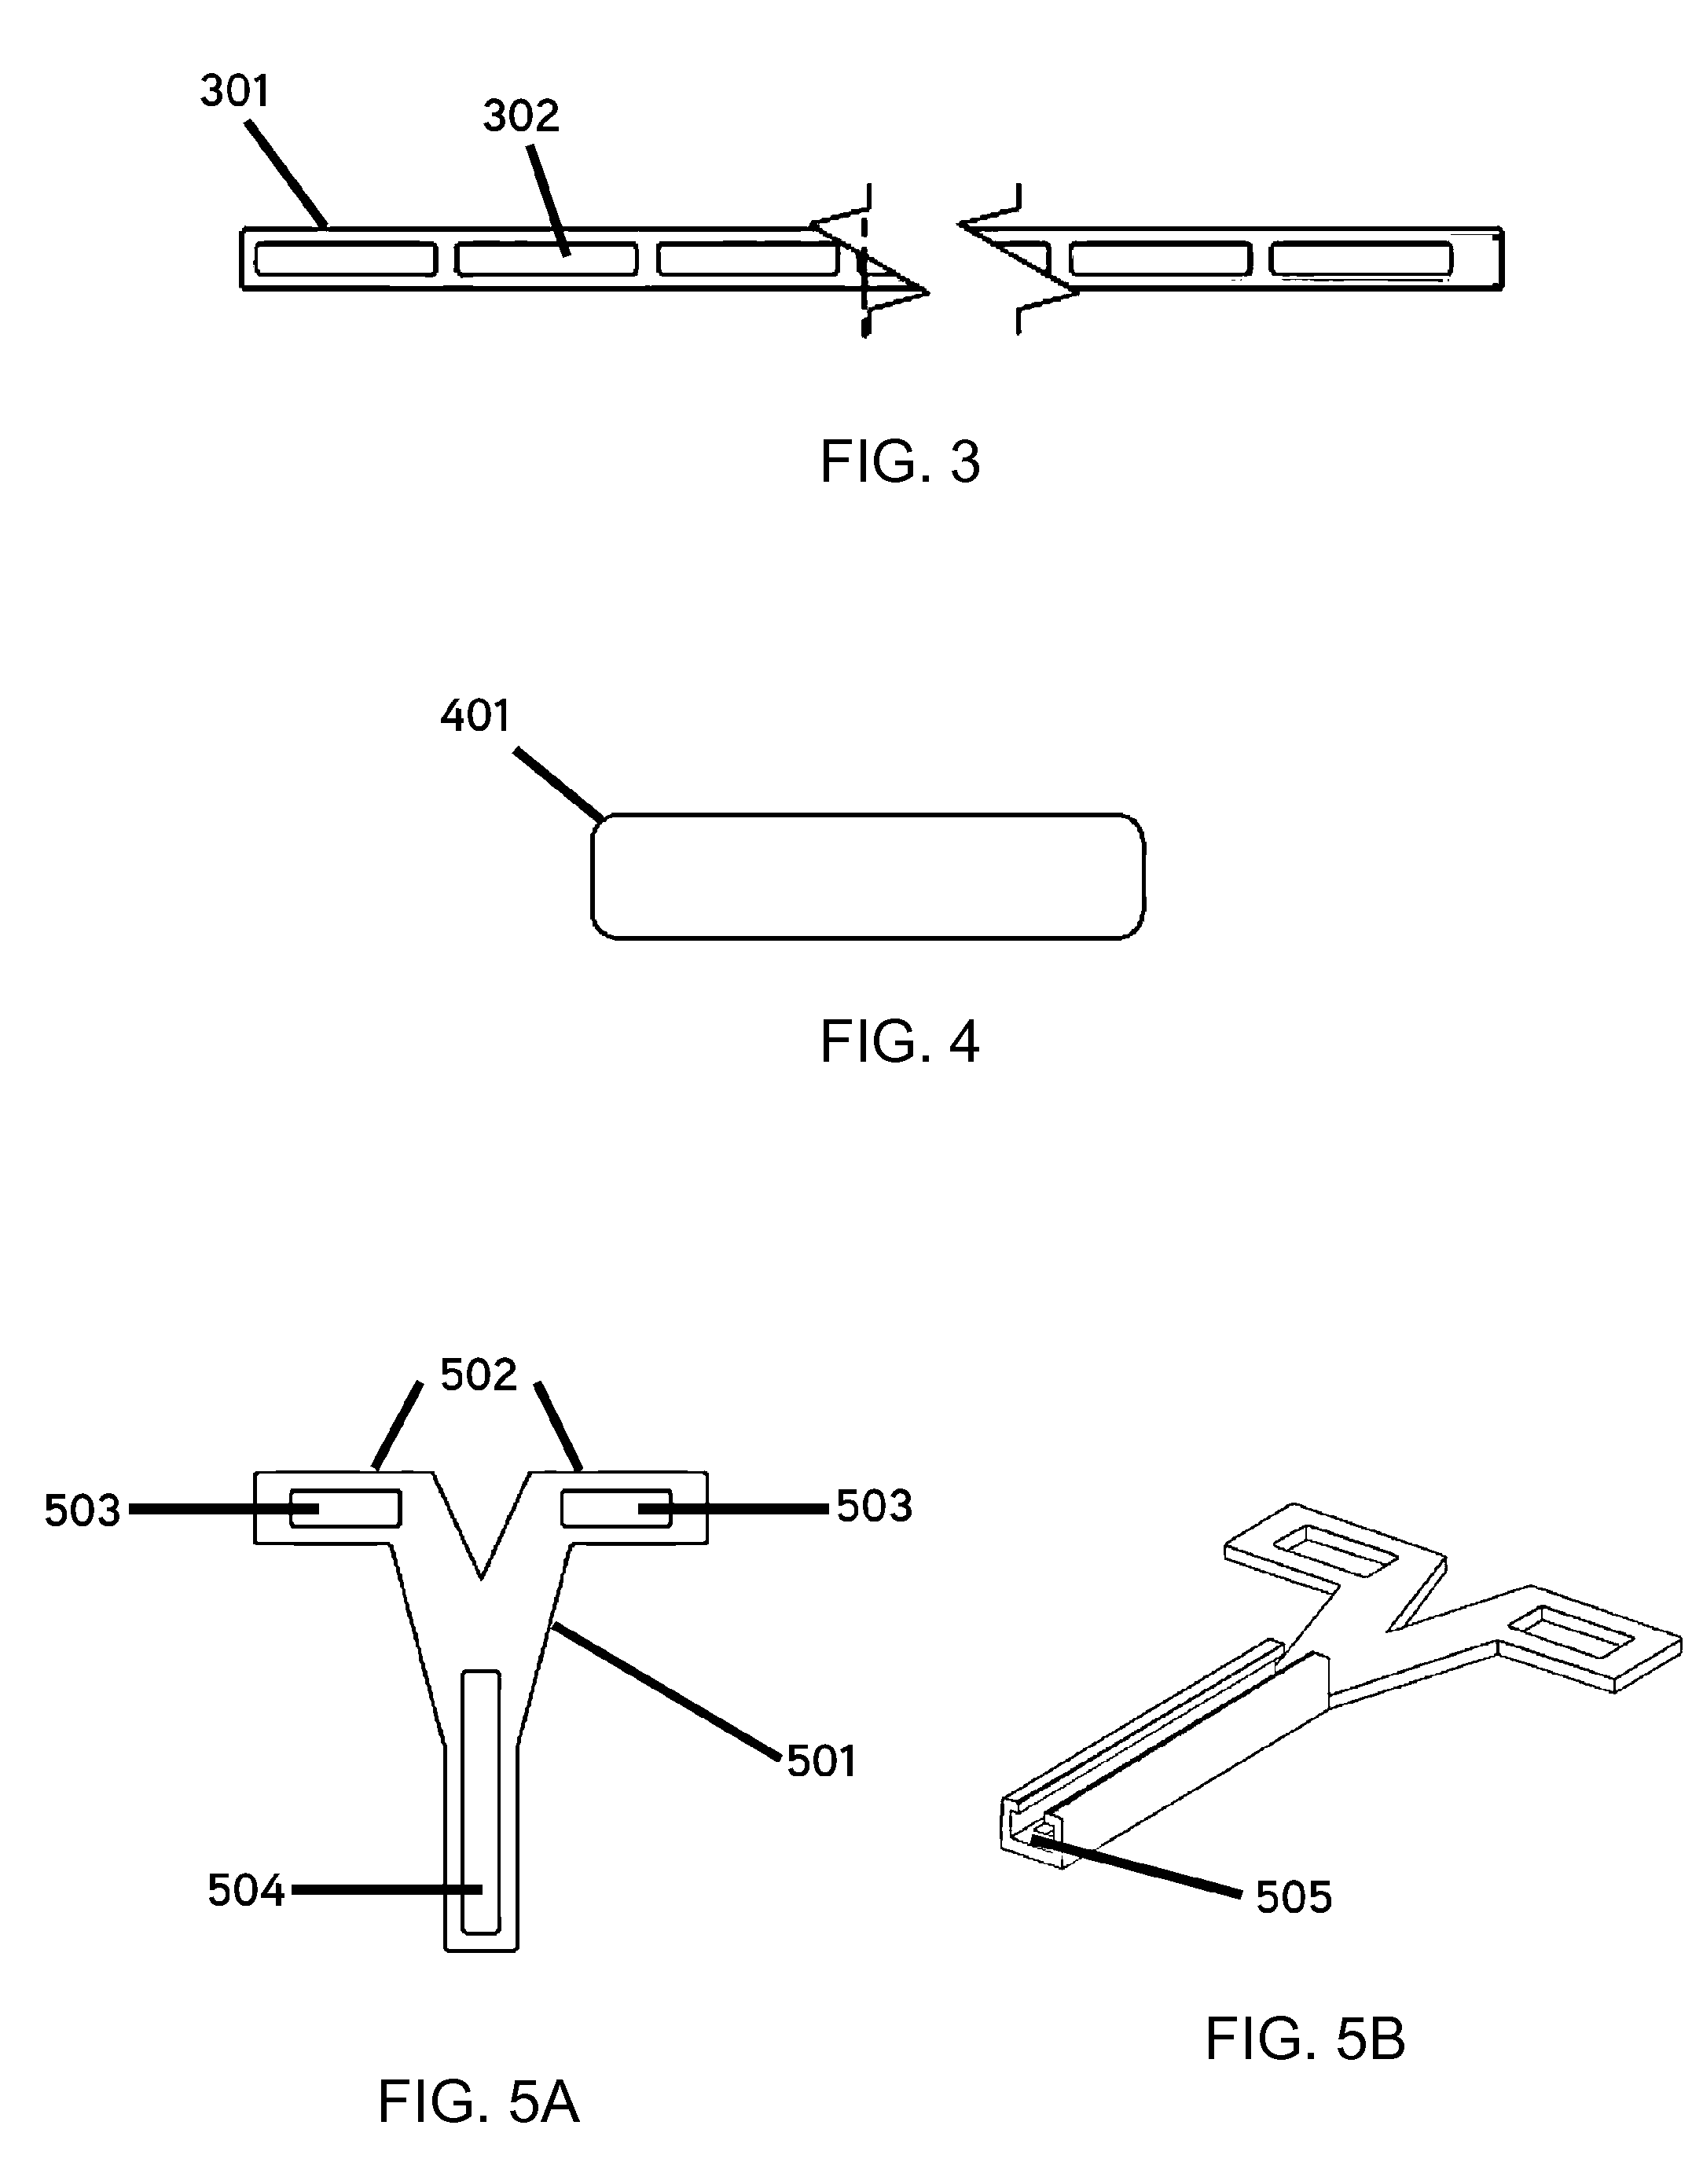 Bone Fixation System And Methods